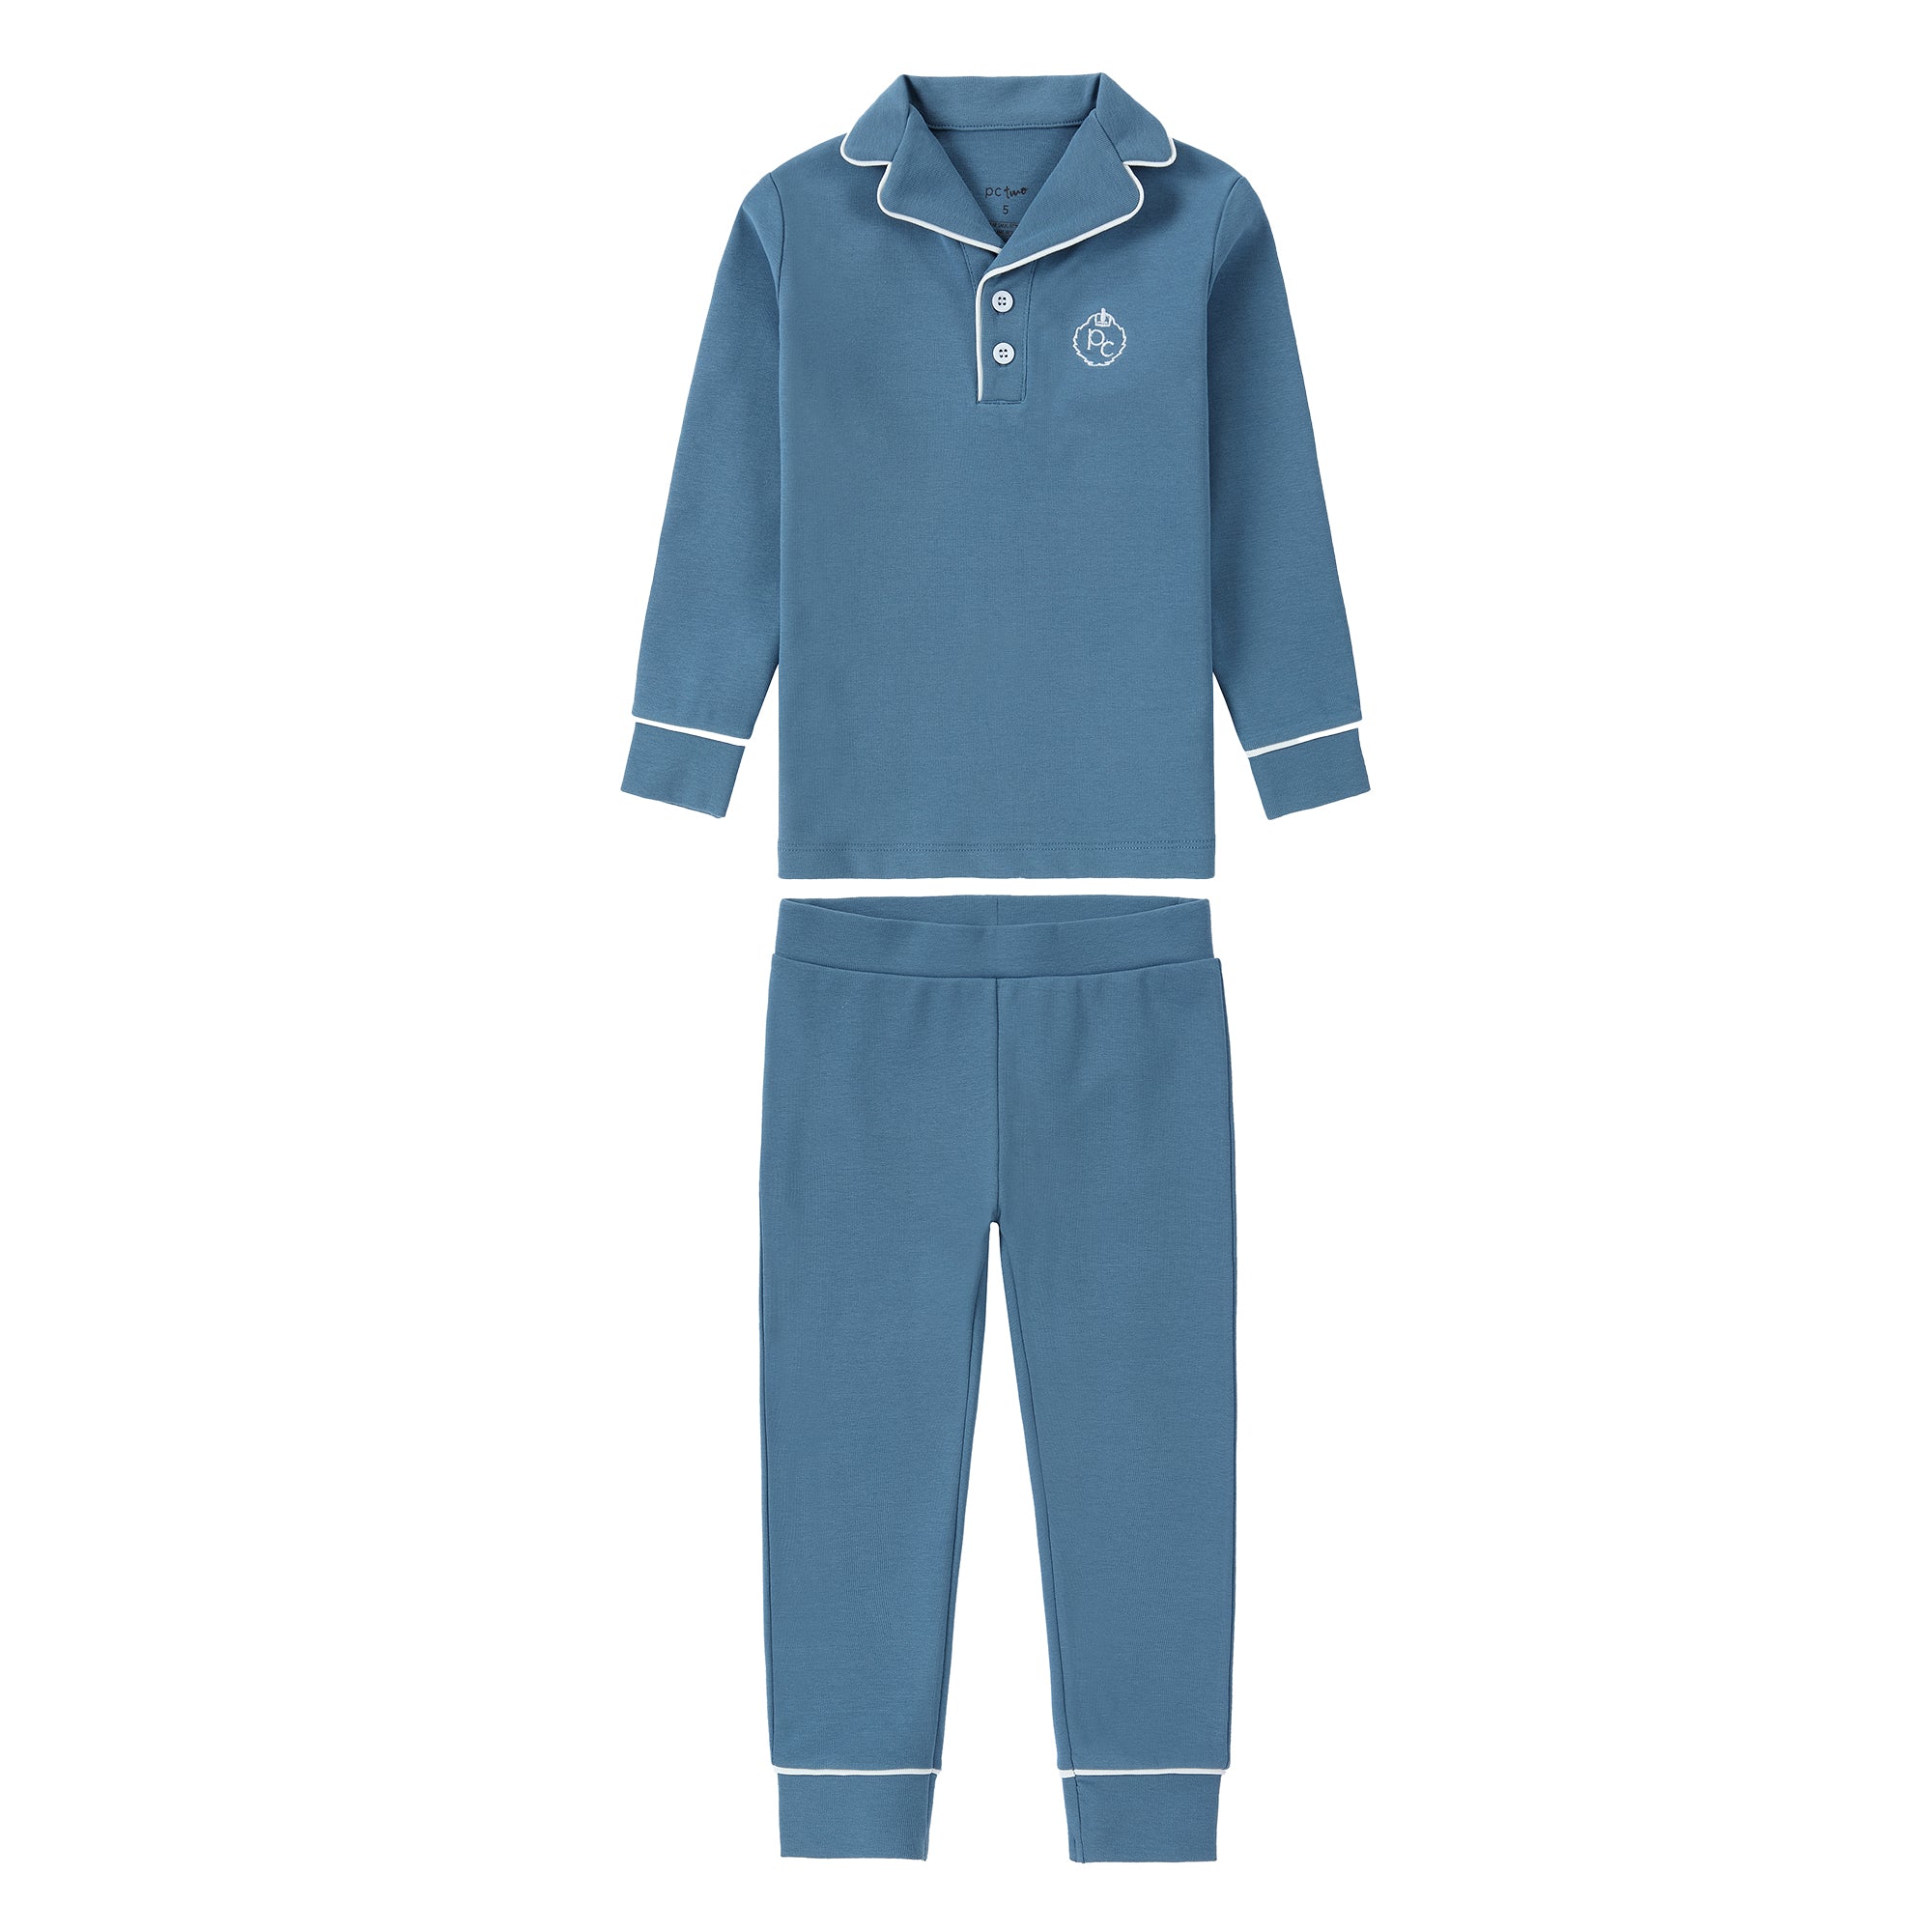 Blue Collar Pajama With White Accents